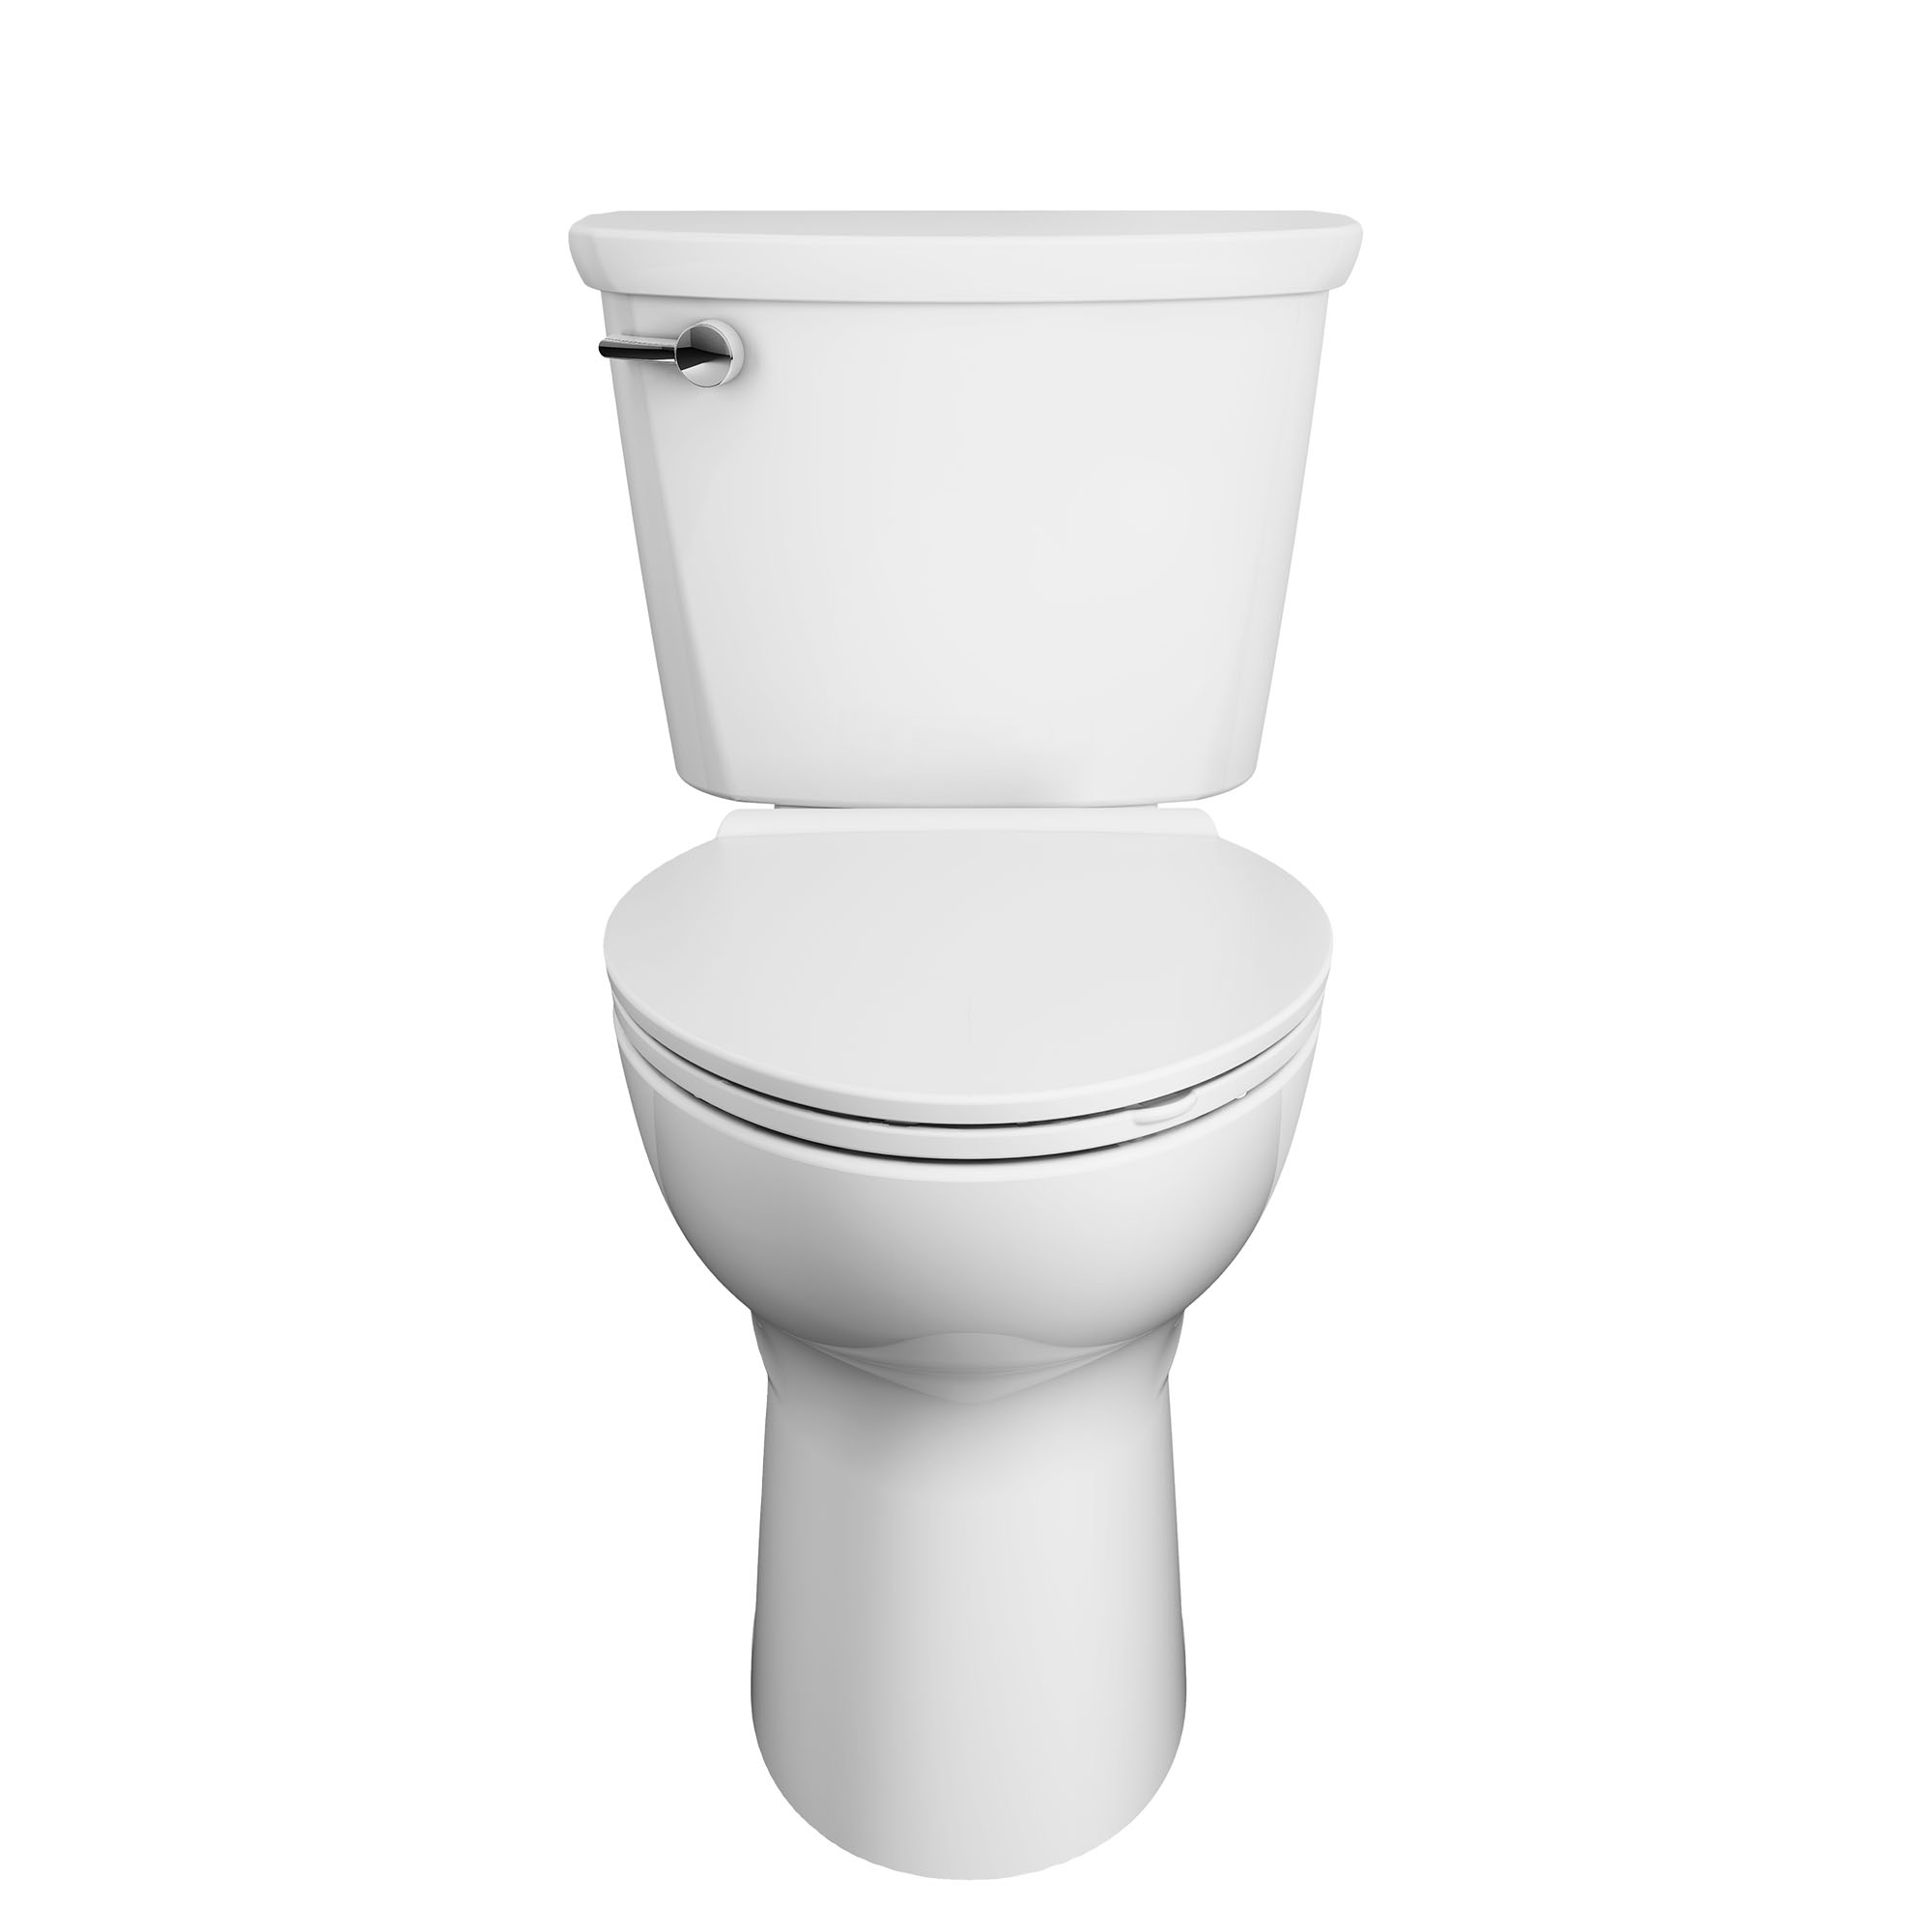 Cadet™ PRO Two-Piece 1.6 gpf/6.0 Lpf Compact Chair Height Elongated Toilet Less Seat